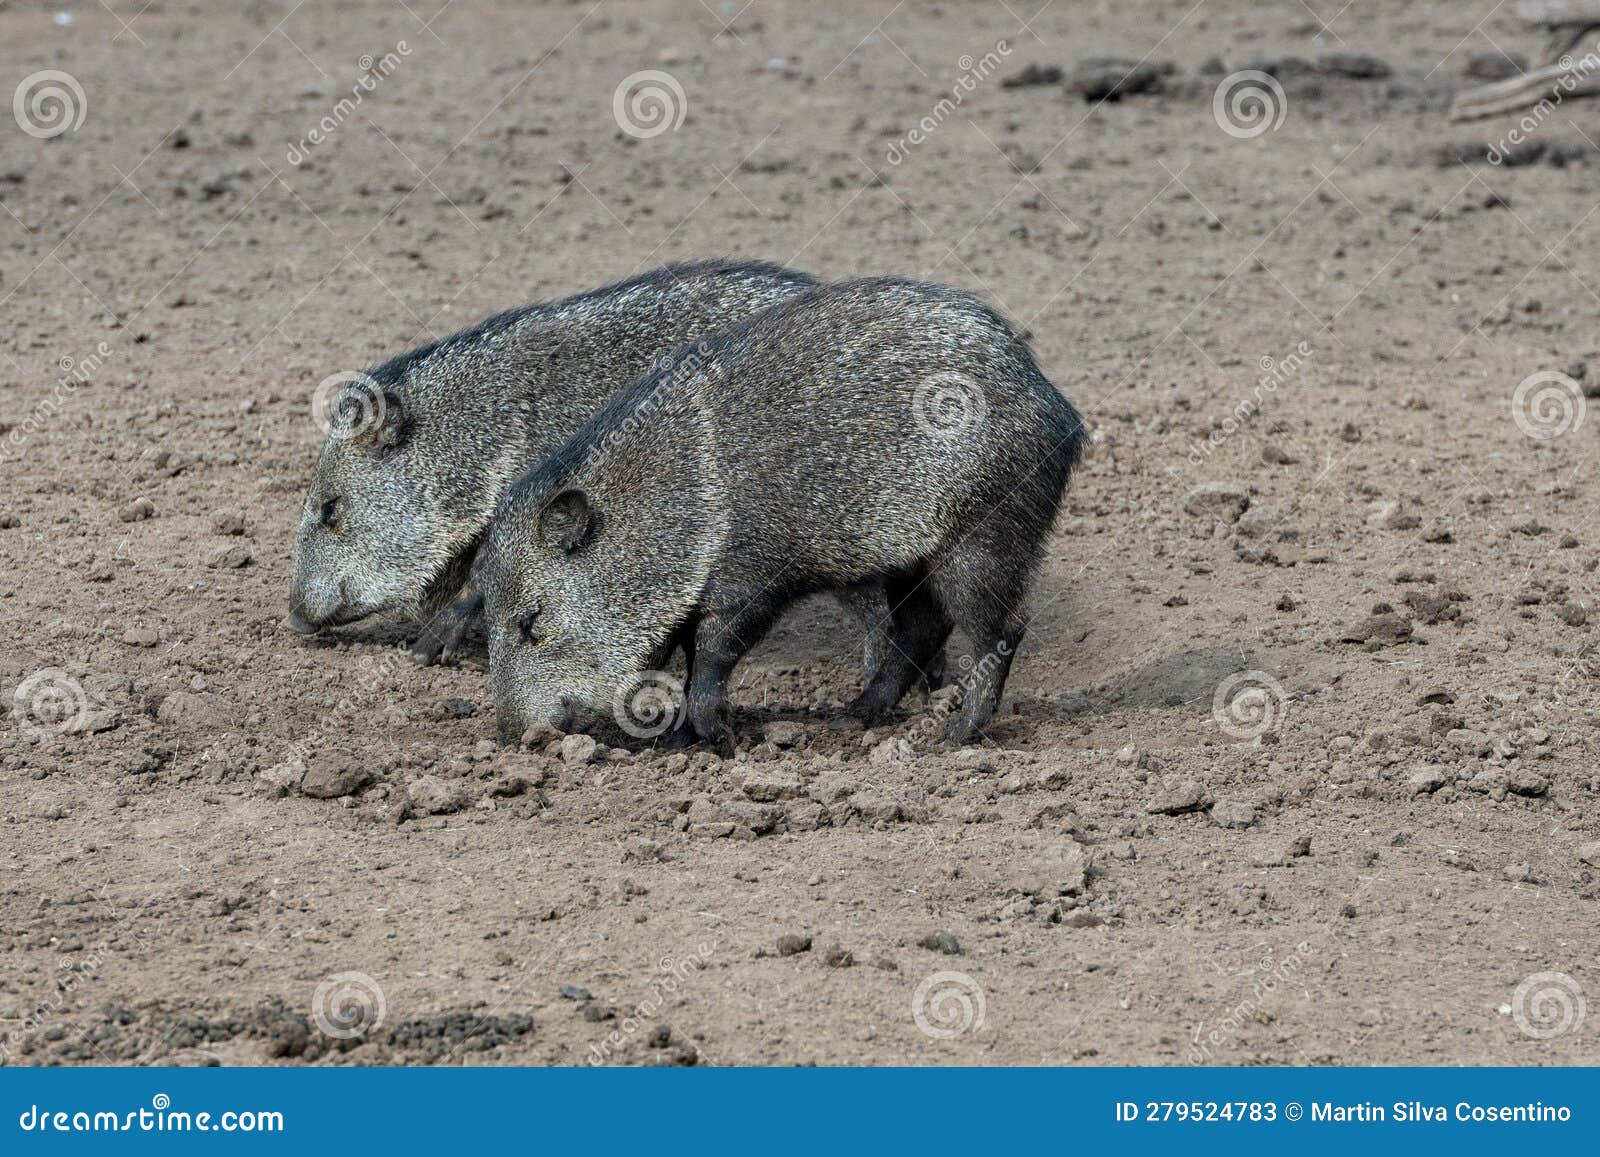 pecari or javelina or skunk pigs in the parque zoologico lecoq in the capital of montevideo in uruguay.